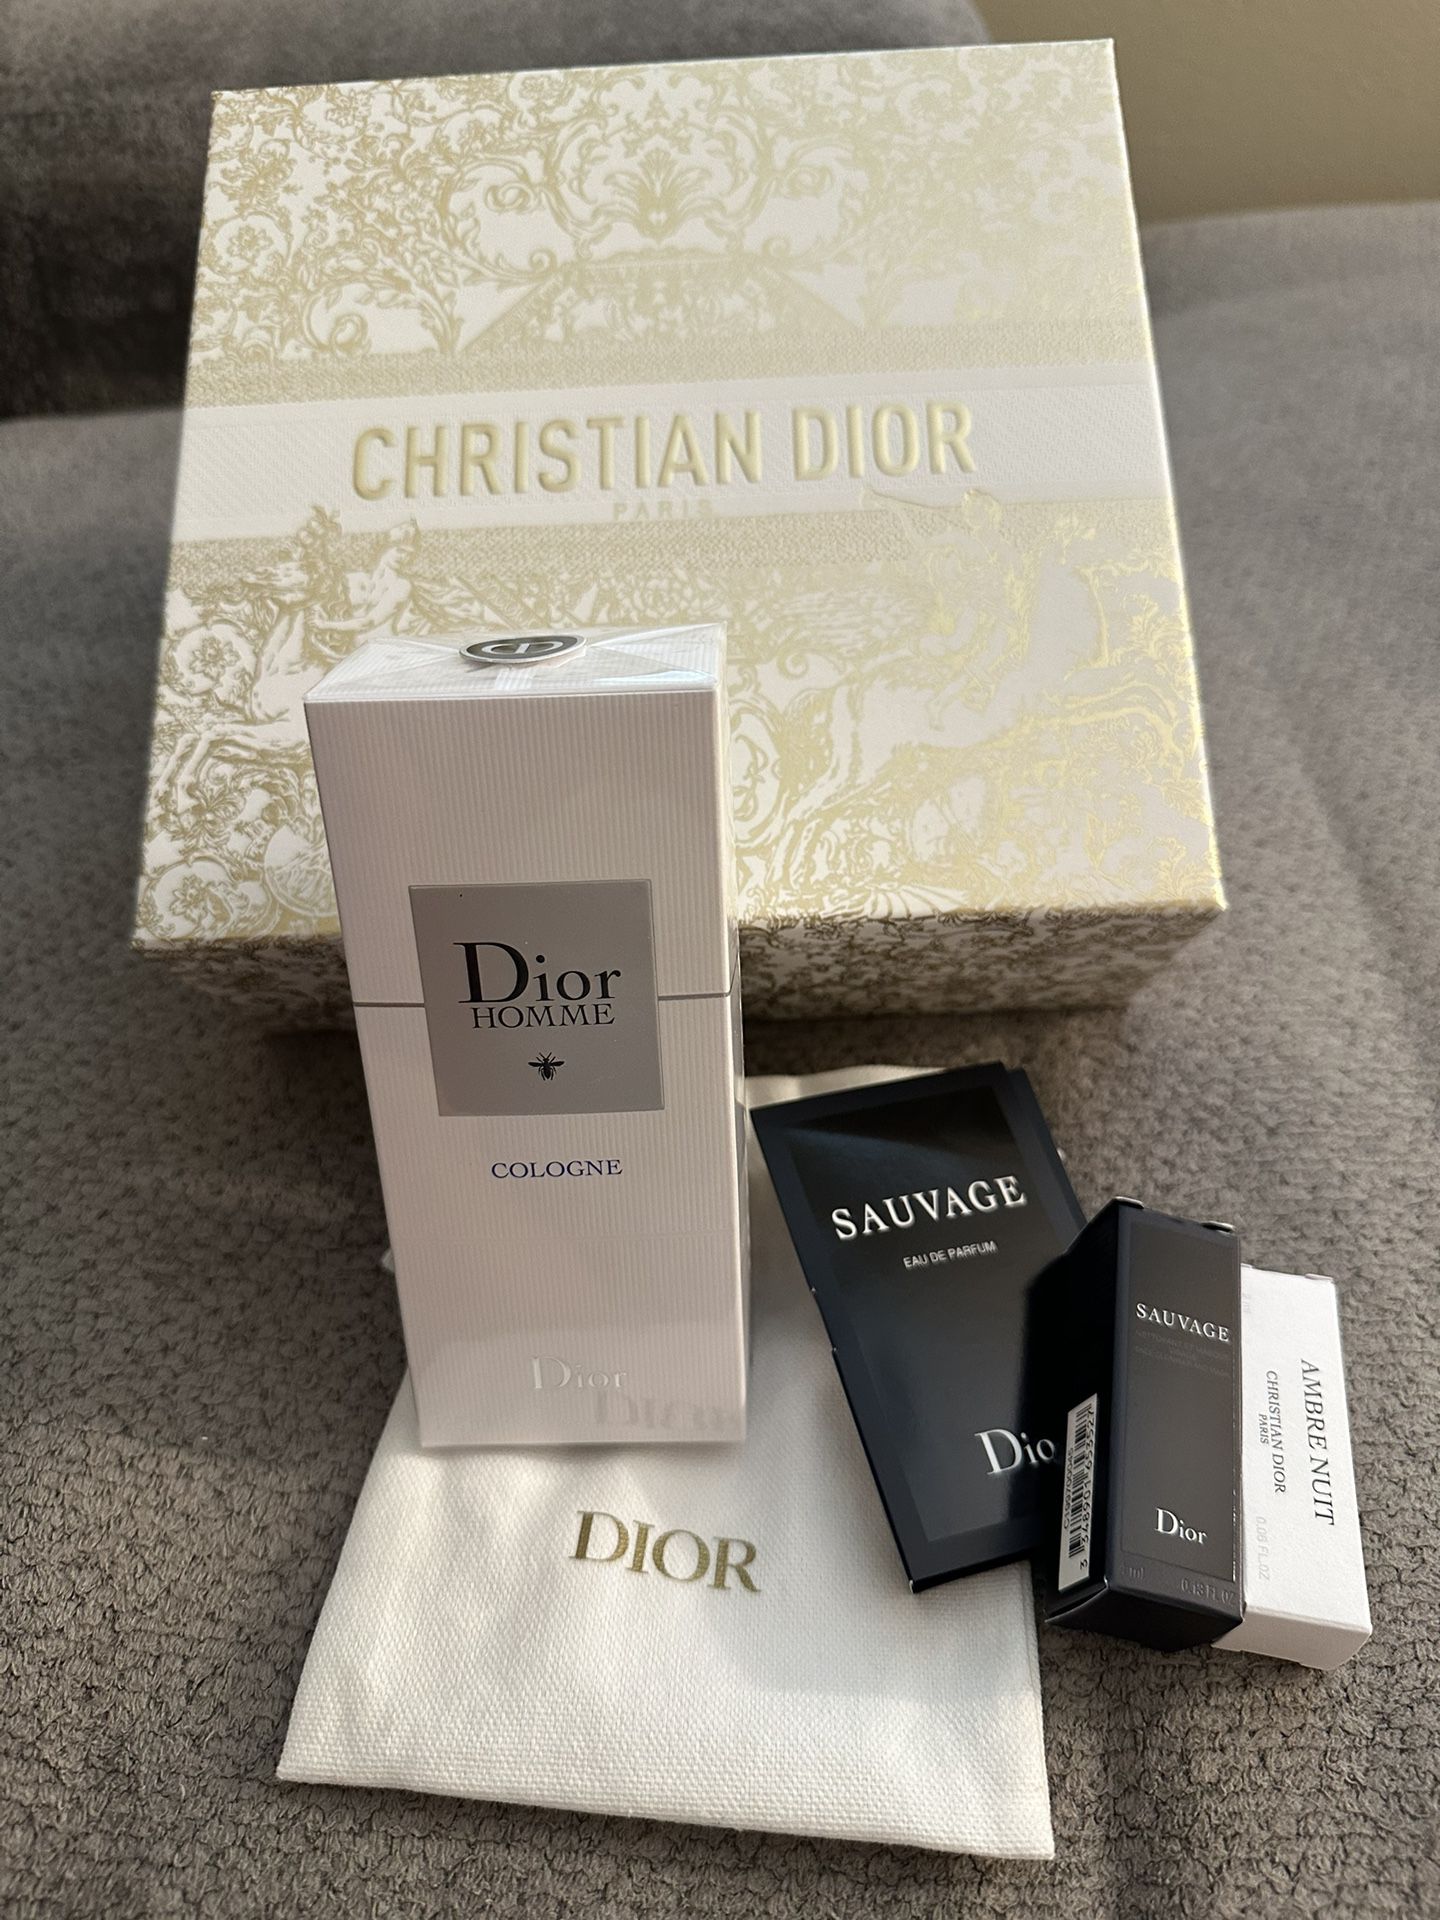 Christian Dior Homme Cologne